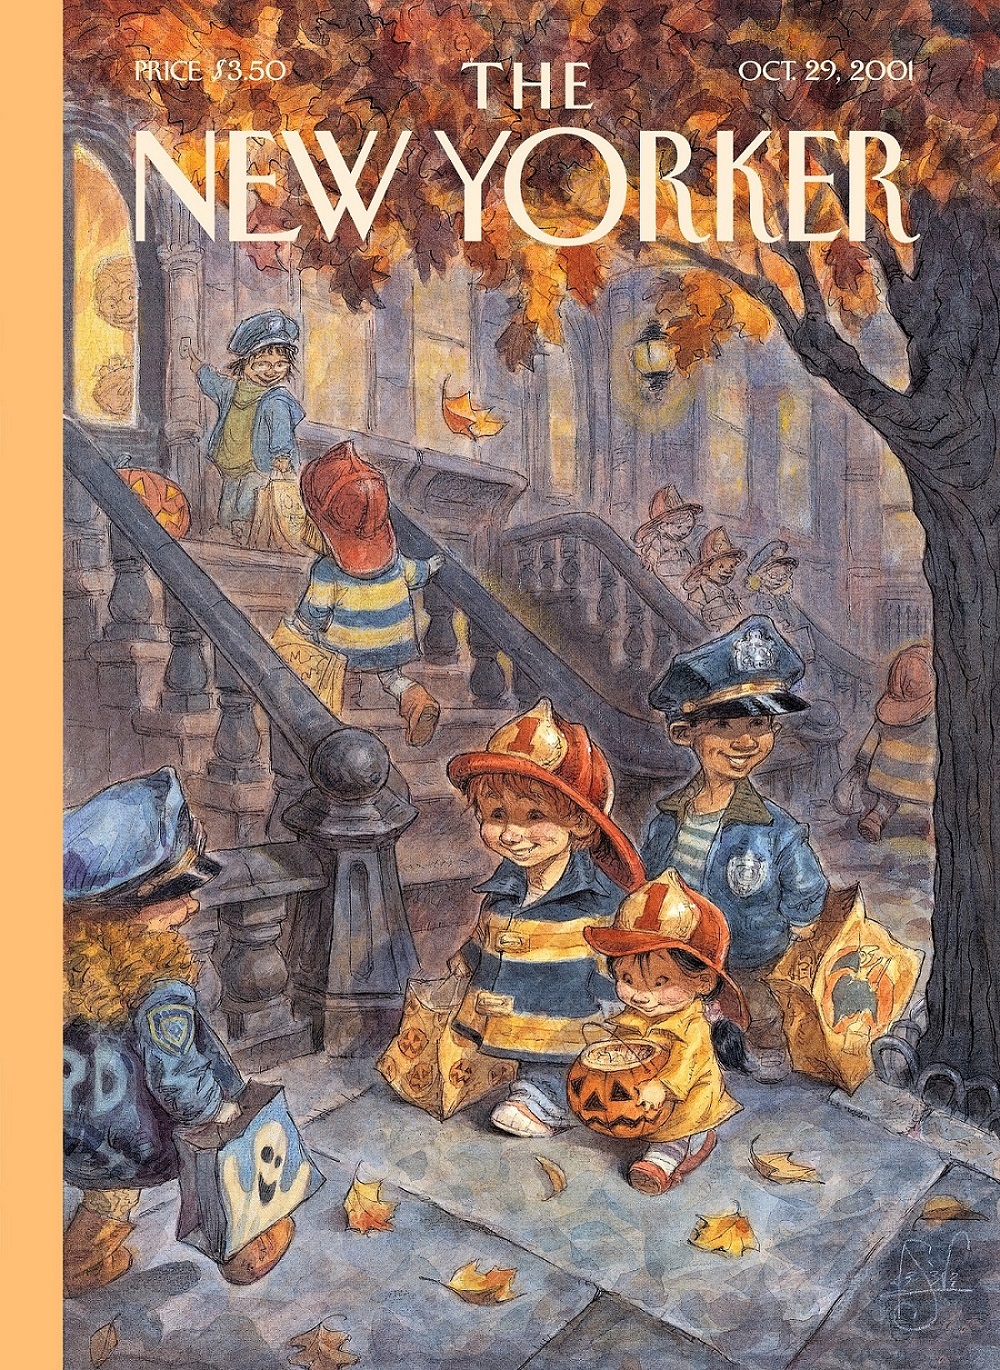 An illustrated cover of the New Yorker magazine depicts children trick-or-treating at a brownstone on an autumn day. The children are all dressed as firefighters or police officers and are carrying Halloween-themed buckets and bags.